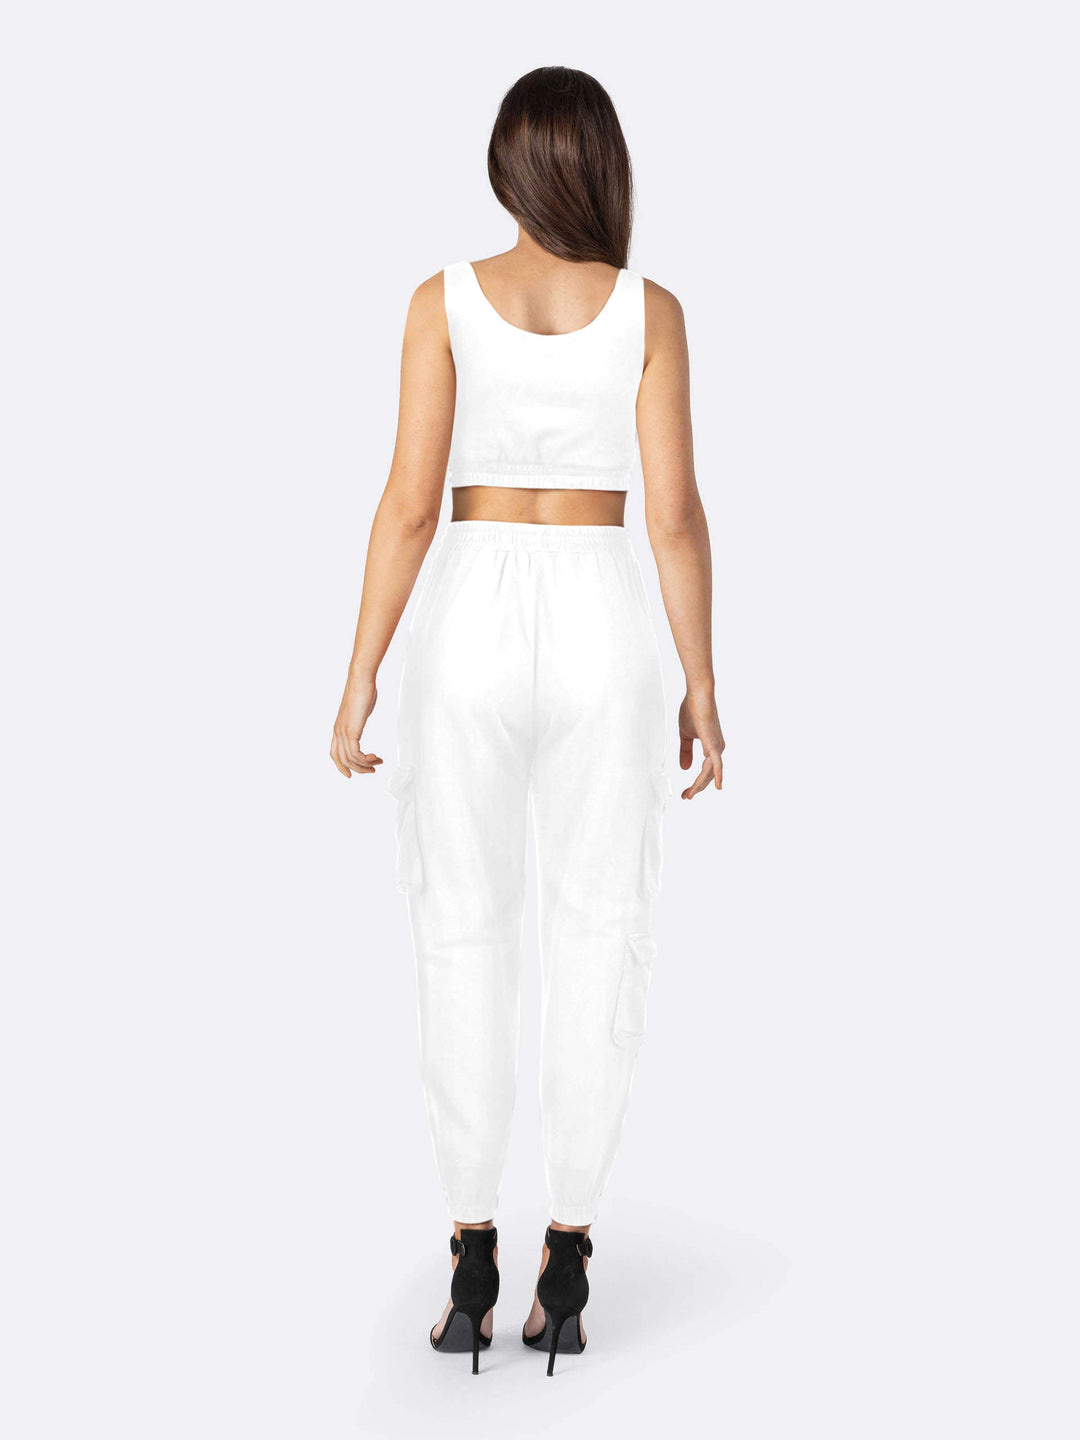 Pack of Joggers with Pockets and Crop Top White Back | Jolovies